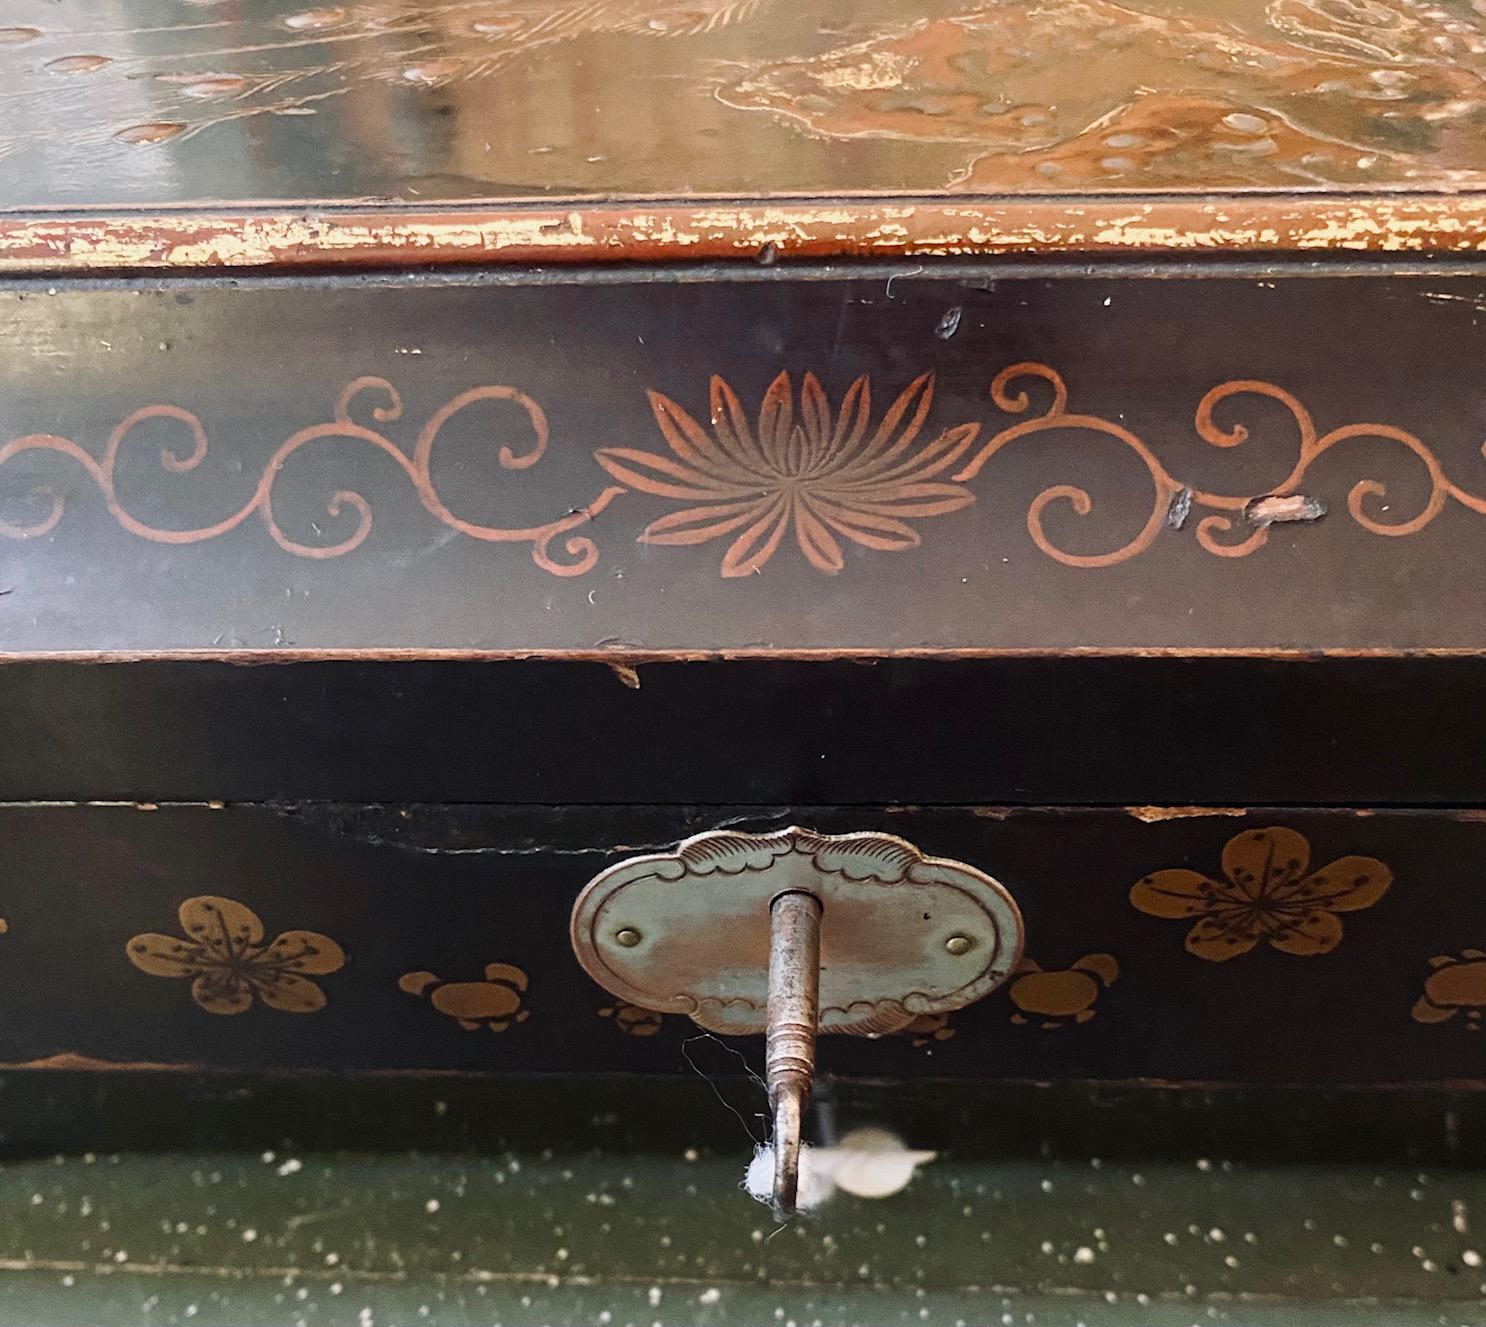 Antique Chinoiserie Papier Mache Box, circa 1920, a rectangular jewelry or work box with hinged pagoda lid, decorated with an embossed phoenix and cherry blossom design, revealing a fitted interior with lift-out compartment-ed tray.

The box remains